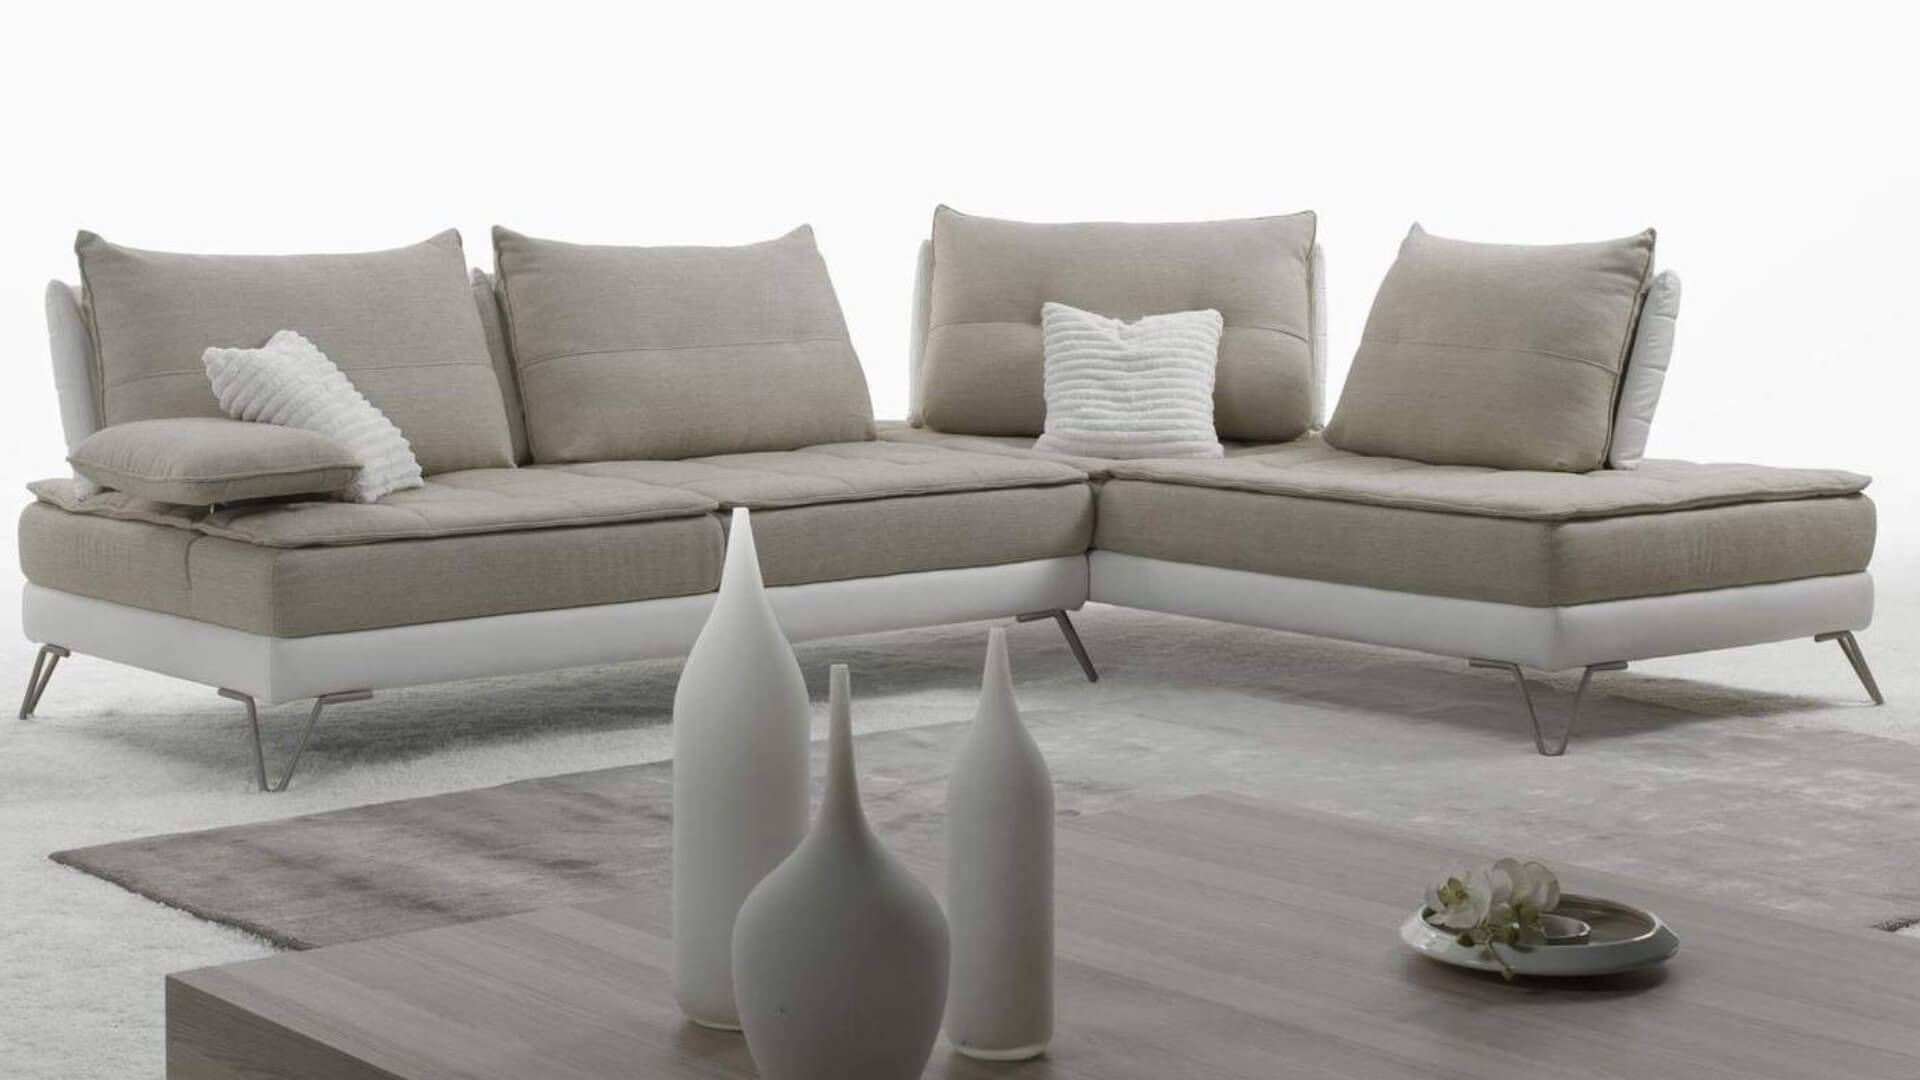 Blog IDW - Total White Design:  ideas for your apartment